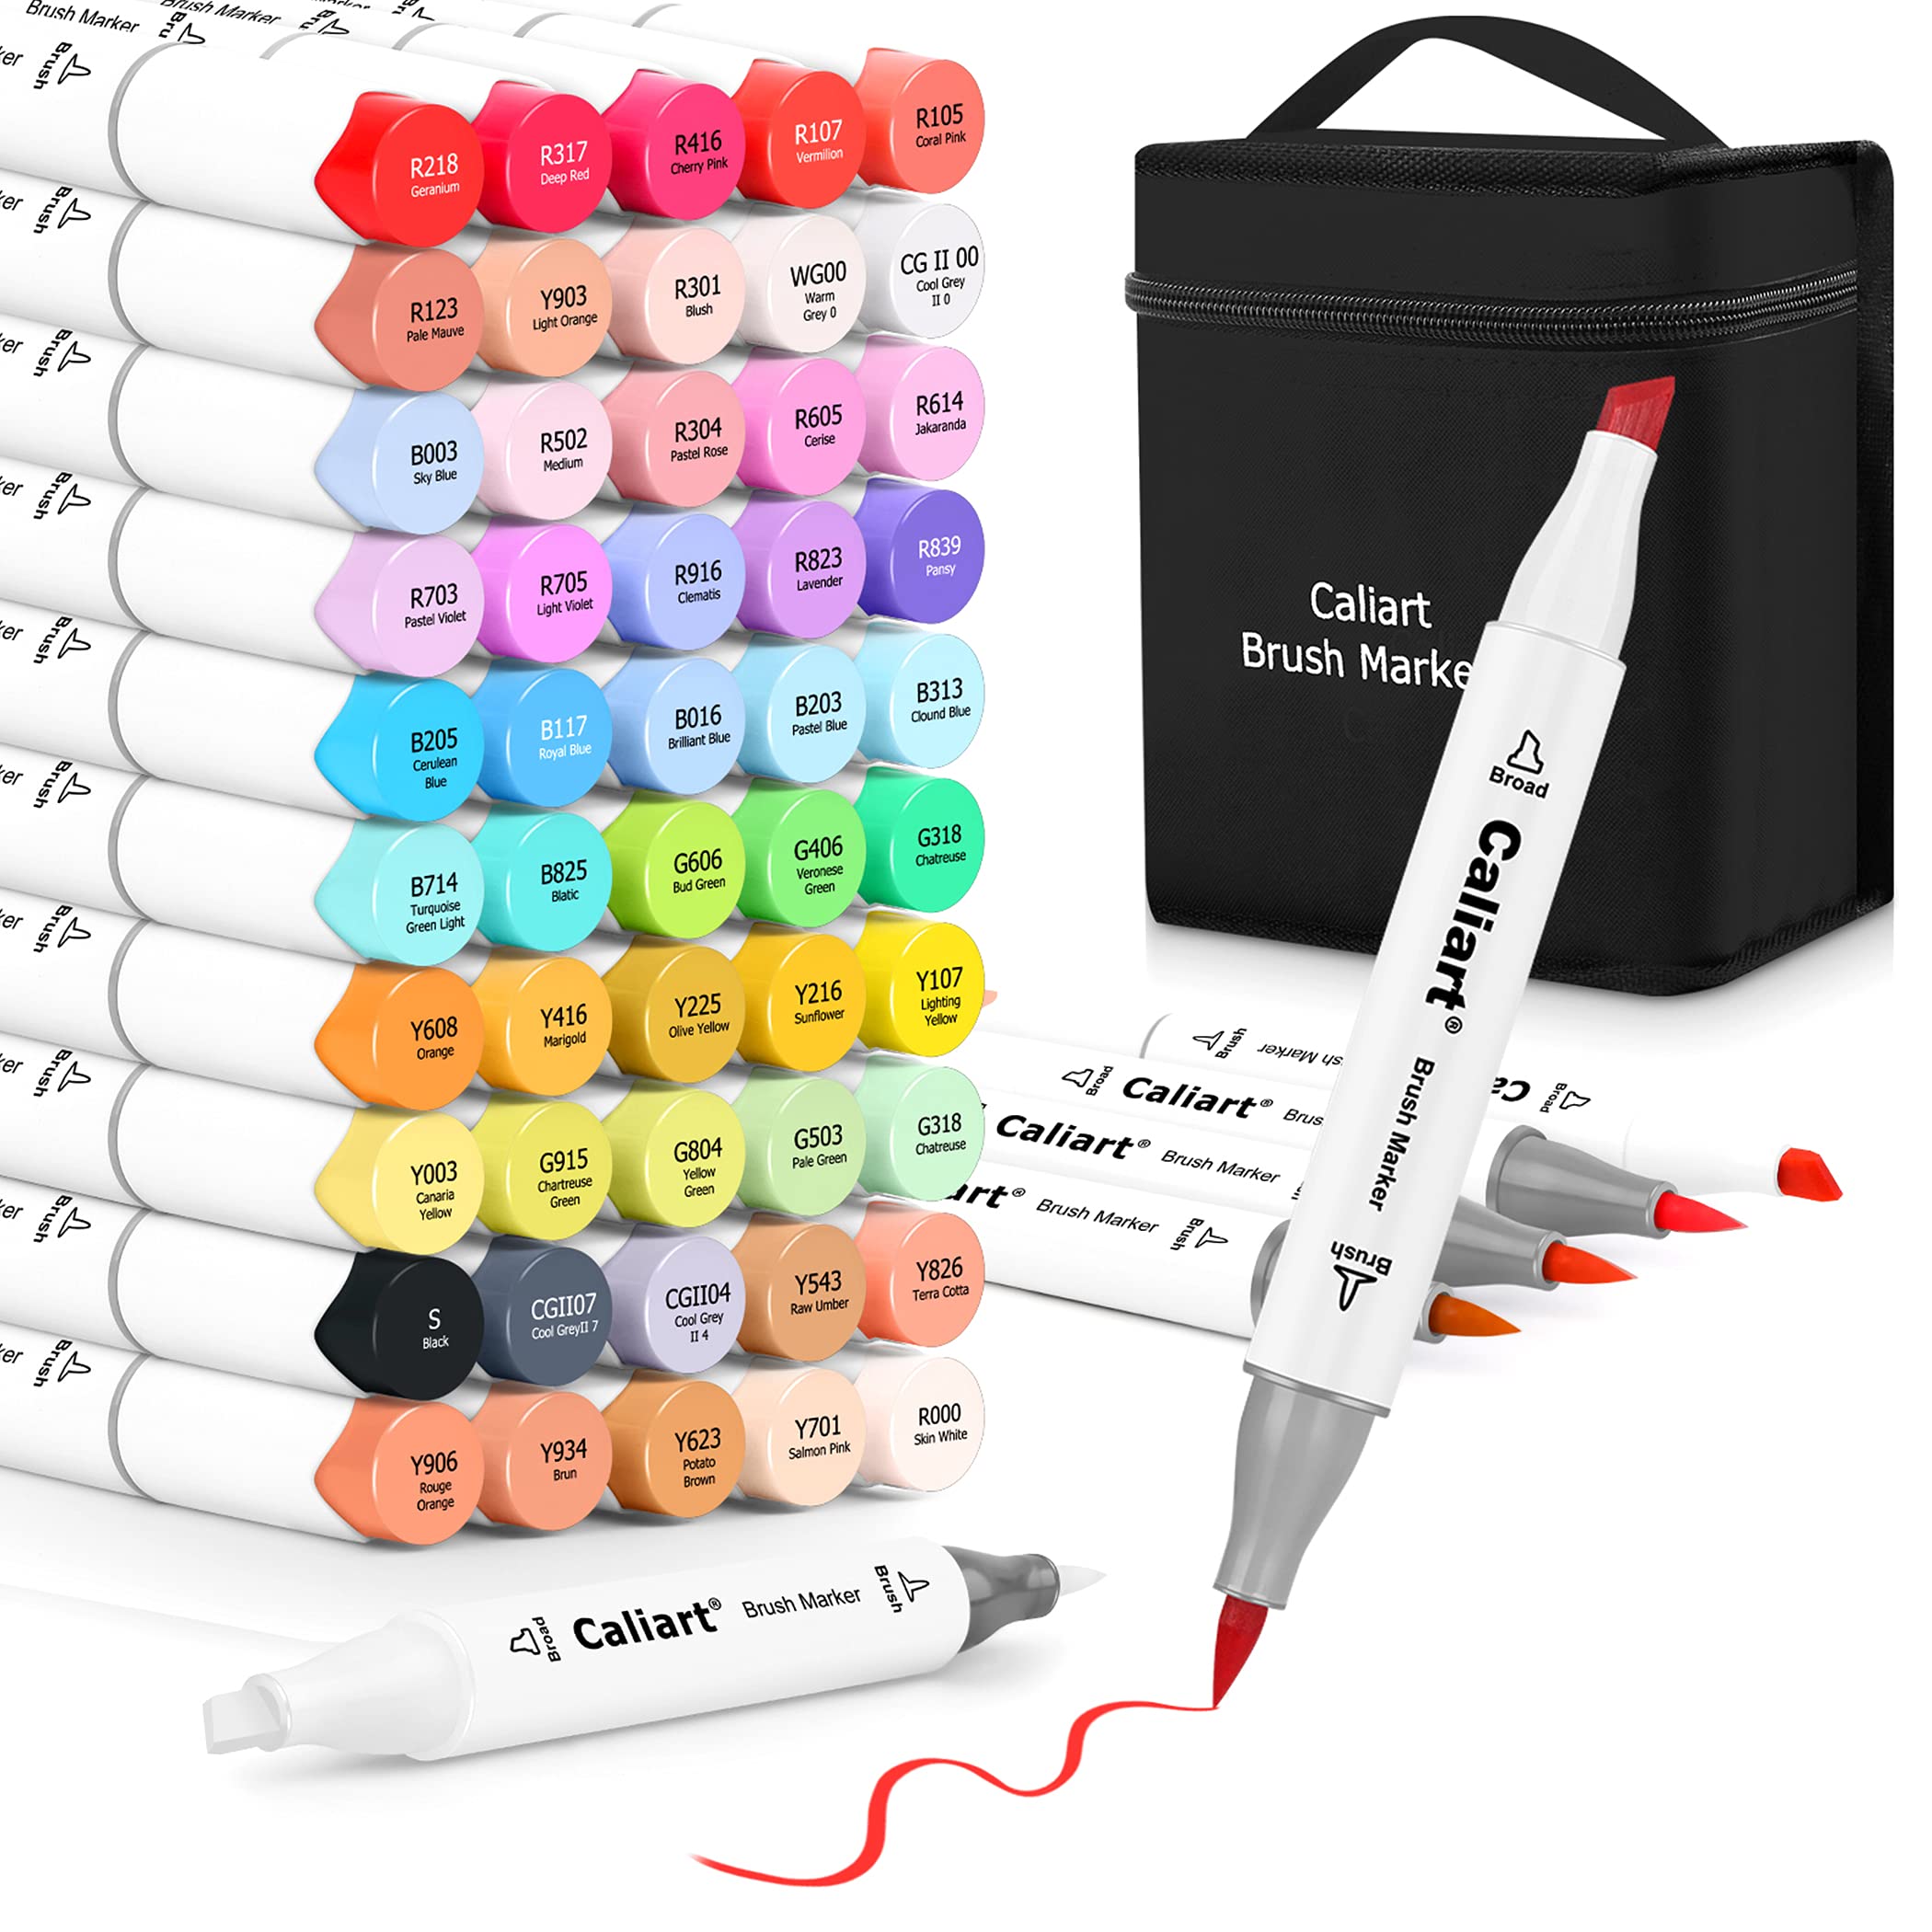  Art Markers Dual Brush Pens for Coloring, 60 Artist Colored  Marker Set, Fine and Brush Tip Pen Art Supplier for Kids Adult Coloring  Books, Bullet Journaling, Drawing : Arts, Crafts